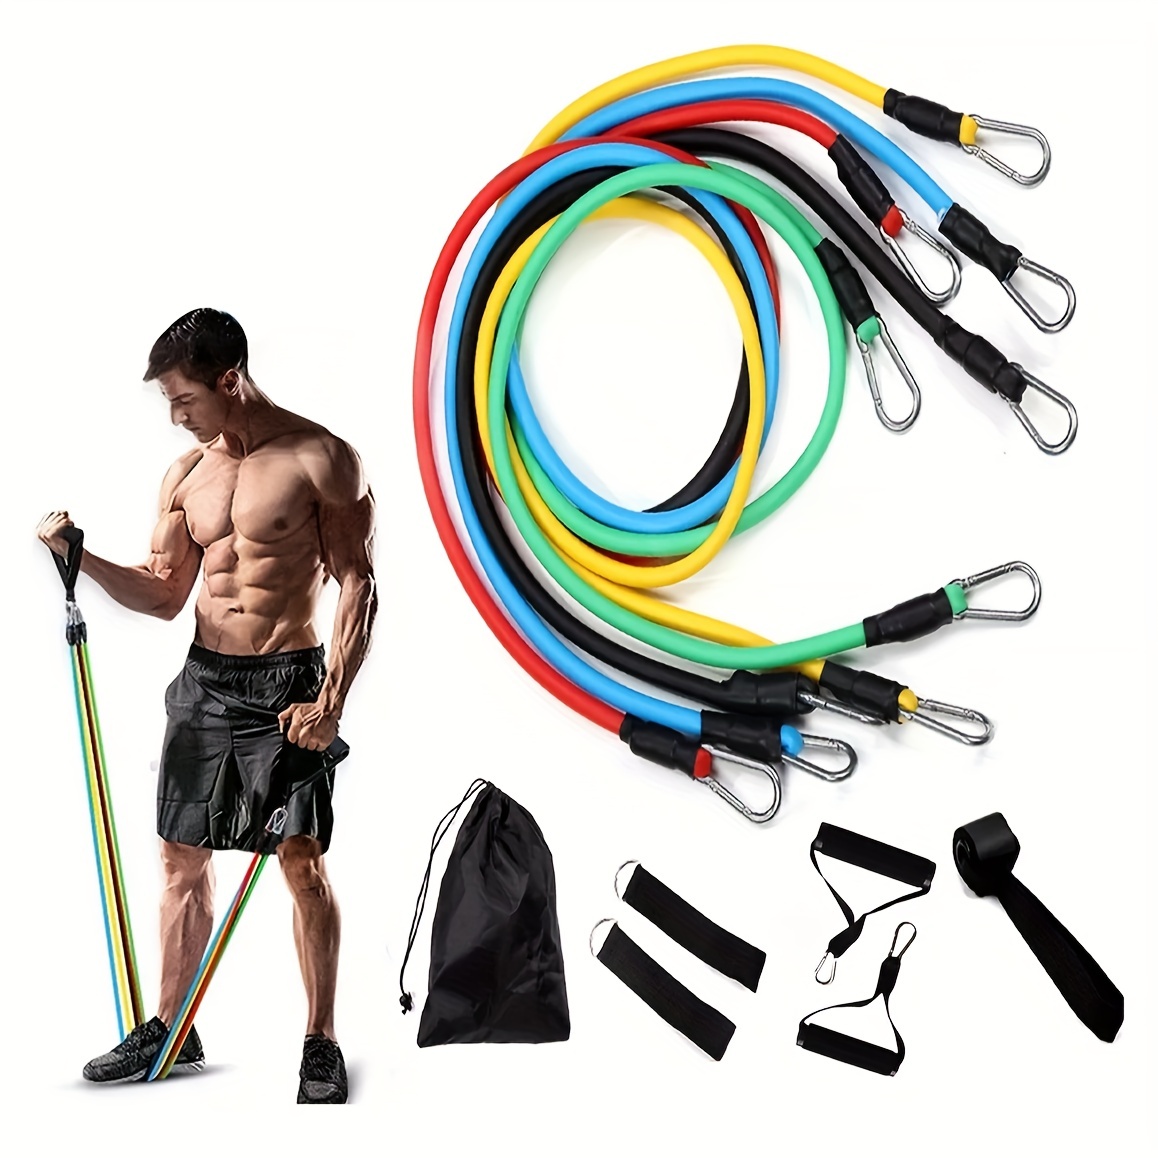 11pcs Resistance Bands Set, With Door Anchor, Handles, Carry Bag, Elastic  Home Workout Equipment, Fitness Bands For Legs For Women & Men